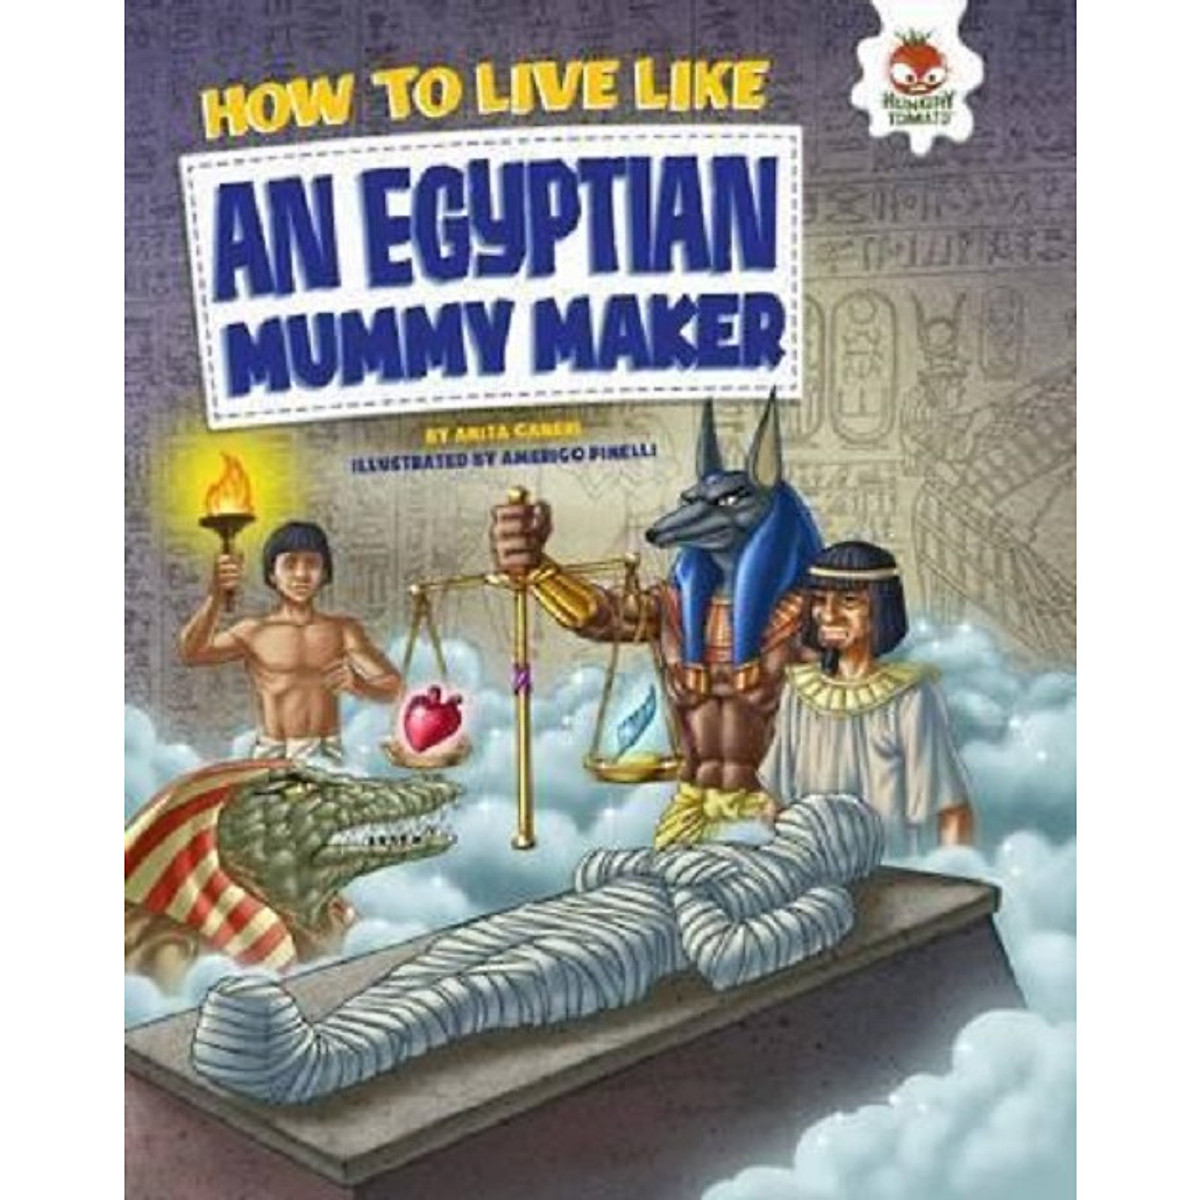 Sách tiếng Anh - How To Live Like: An Egyptian Mummy Maker